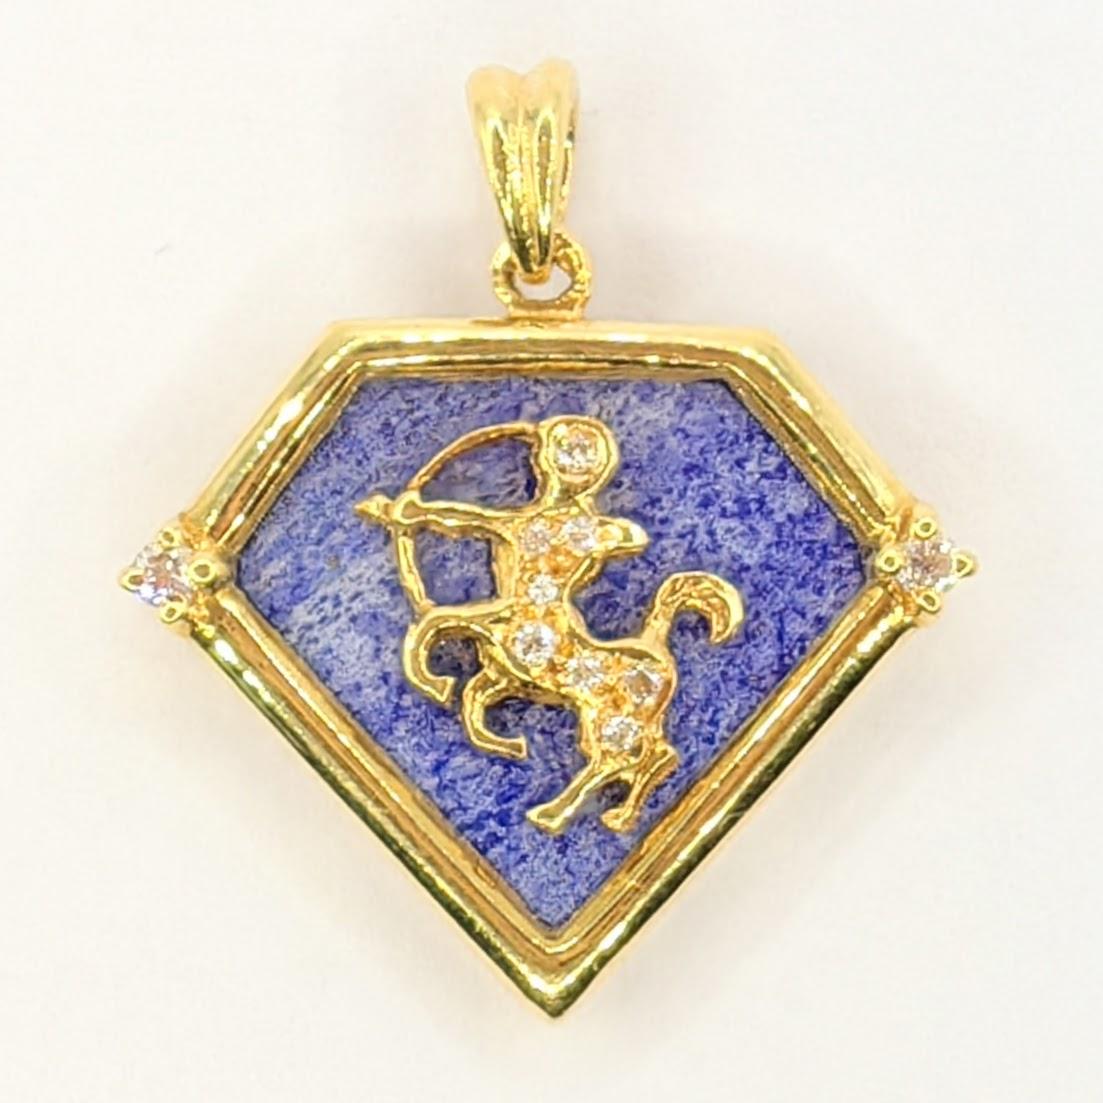 Introducing the Vintage 90's Sagittarius Blue Lapis Diamond Necklace Pendant in 20K Yellow Gold. This pendant is a true embodiment of celestial beauty and timeless elegance.

At the heart of this pendant lies a beautifully crafted Sagittarius zodiac